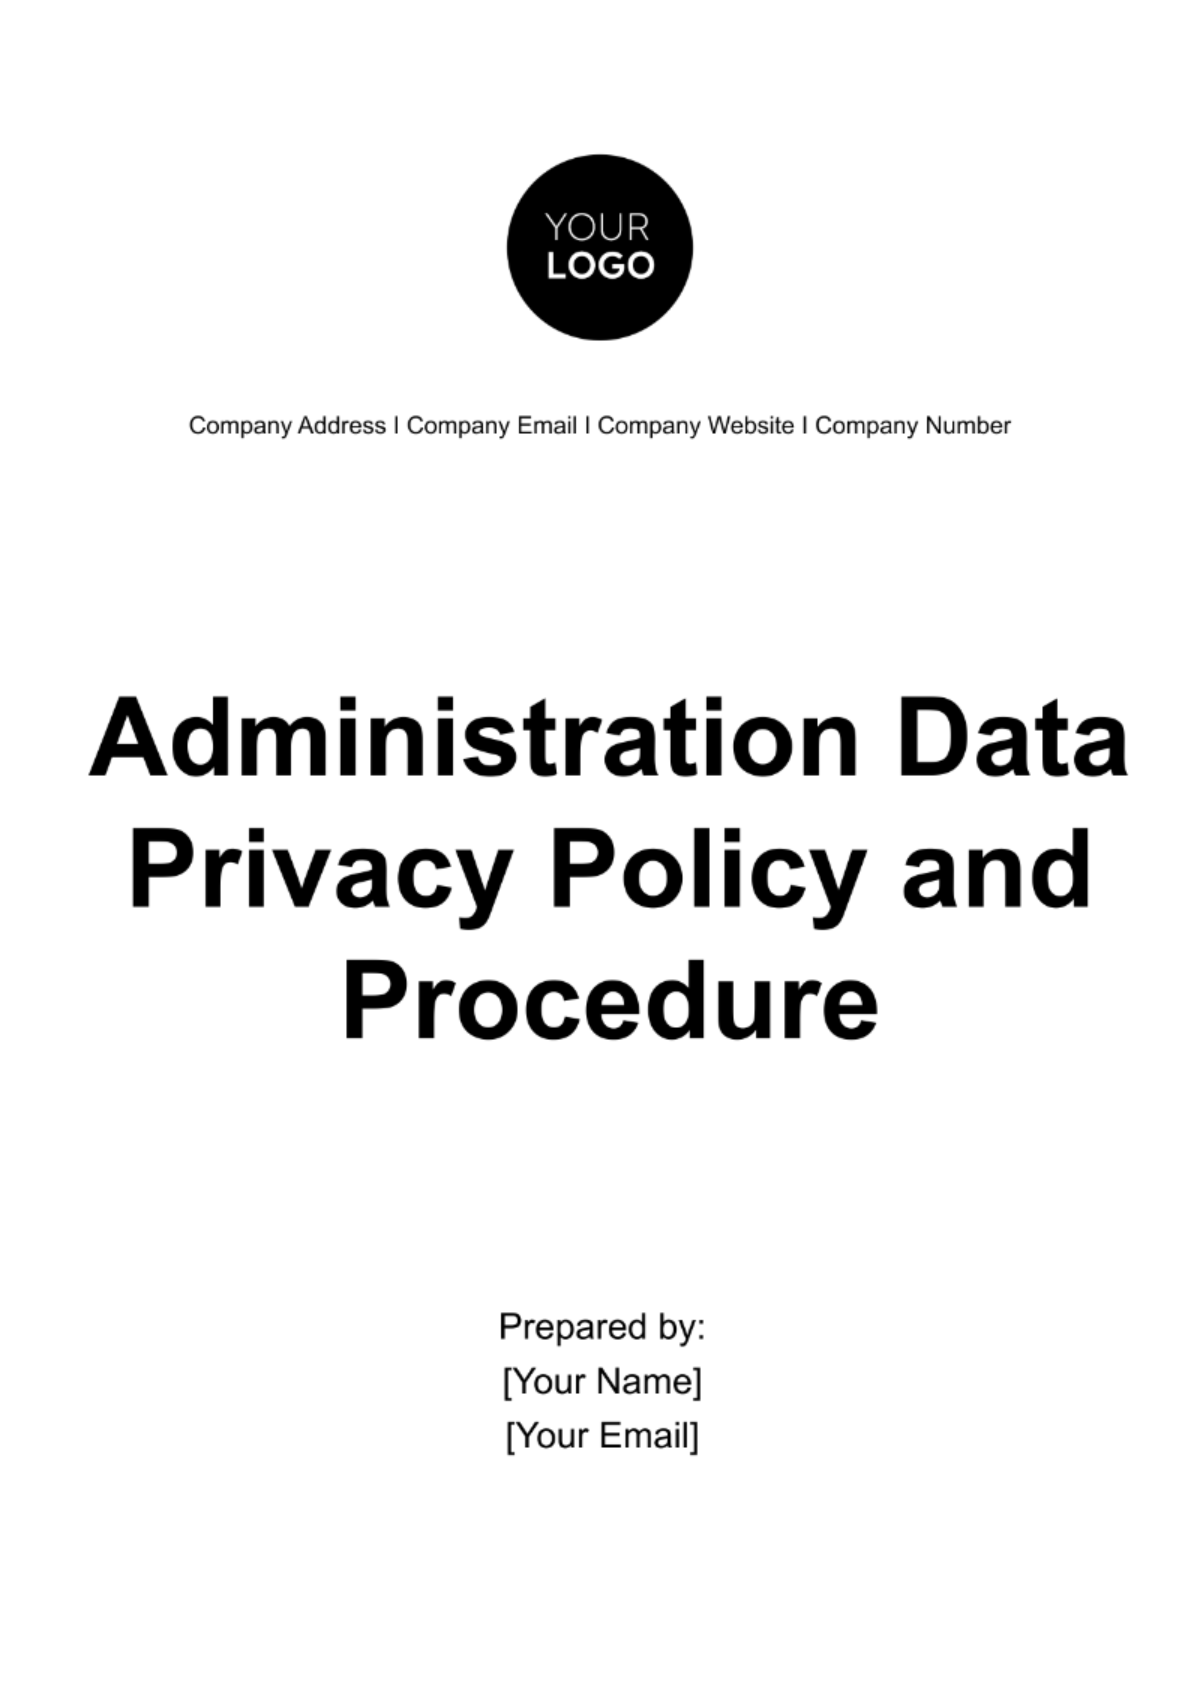 Administration Data Privacy Policy and Procedure Template